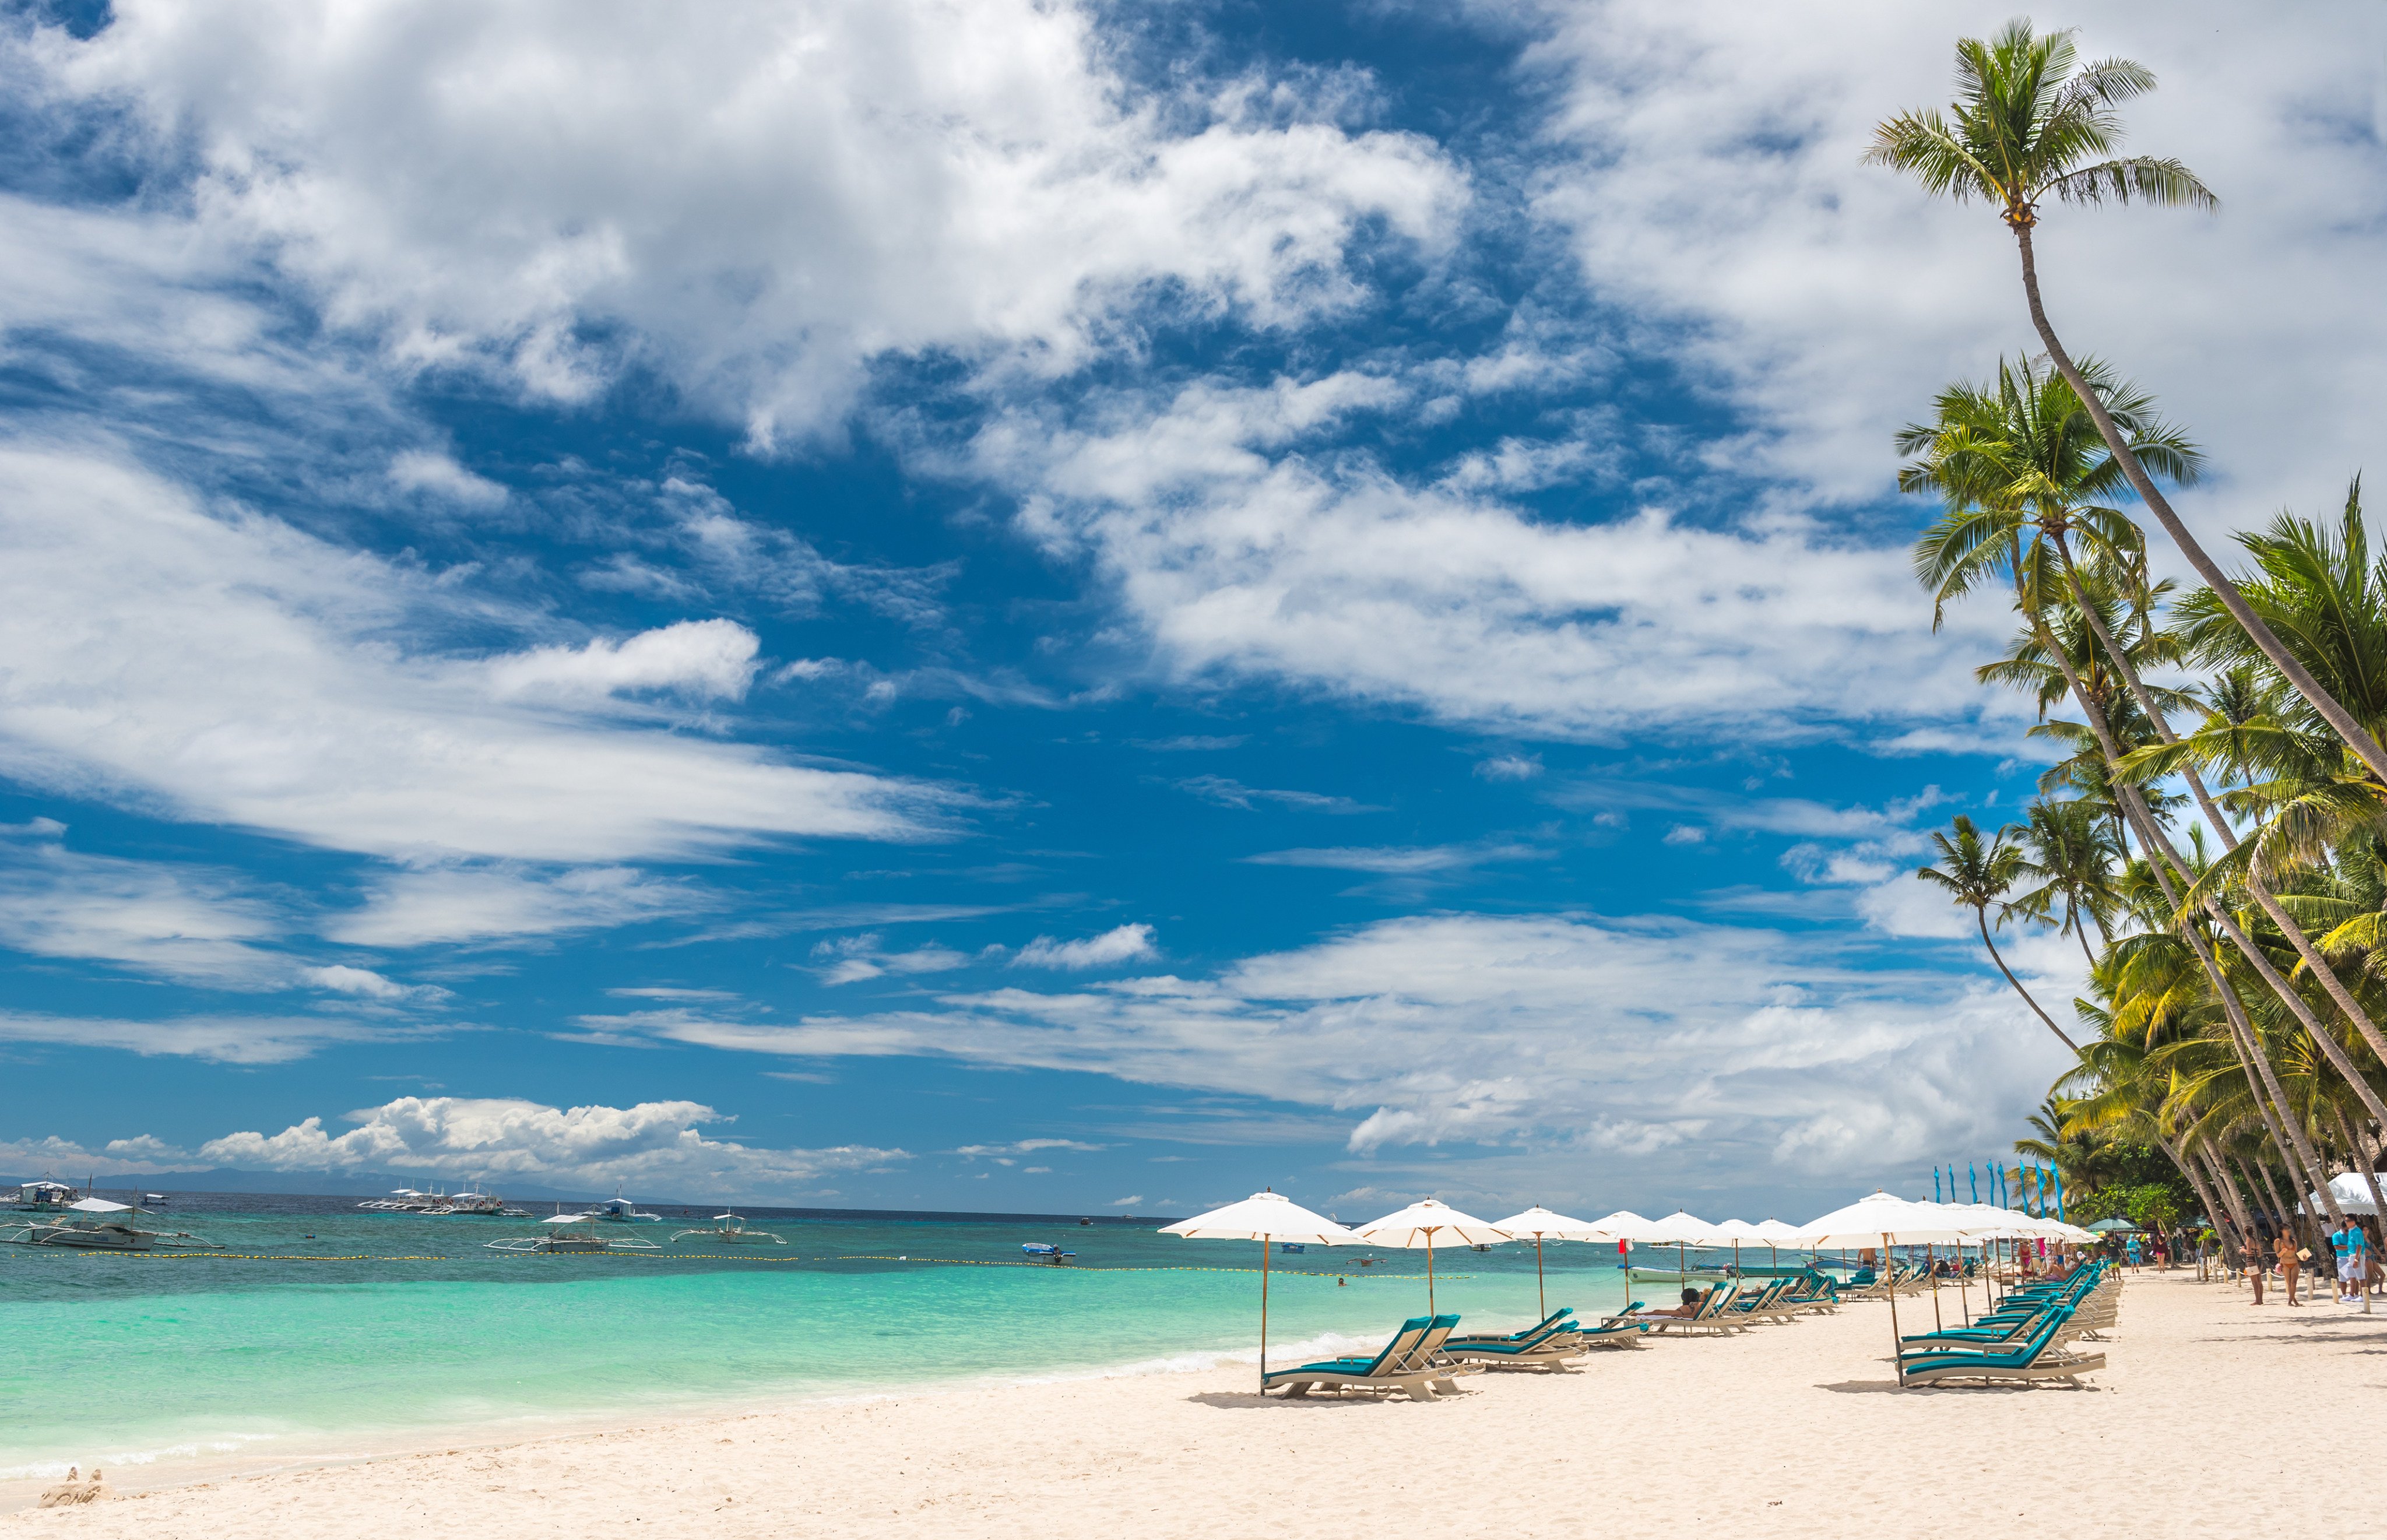 Alona Beach on Panglao. The island, in Bohol province, is being developed to become the Philippines’ next holiday hot spot. Photo: Shutterstock